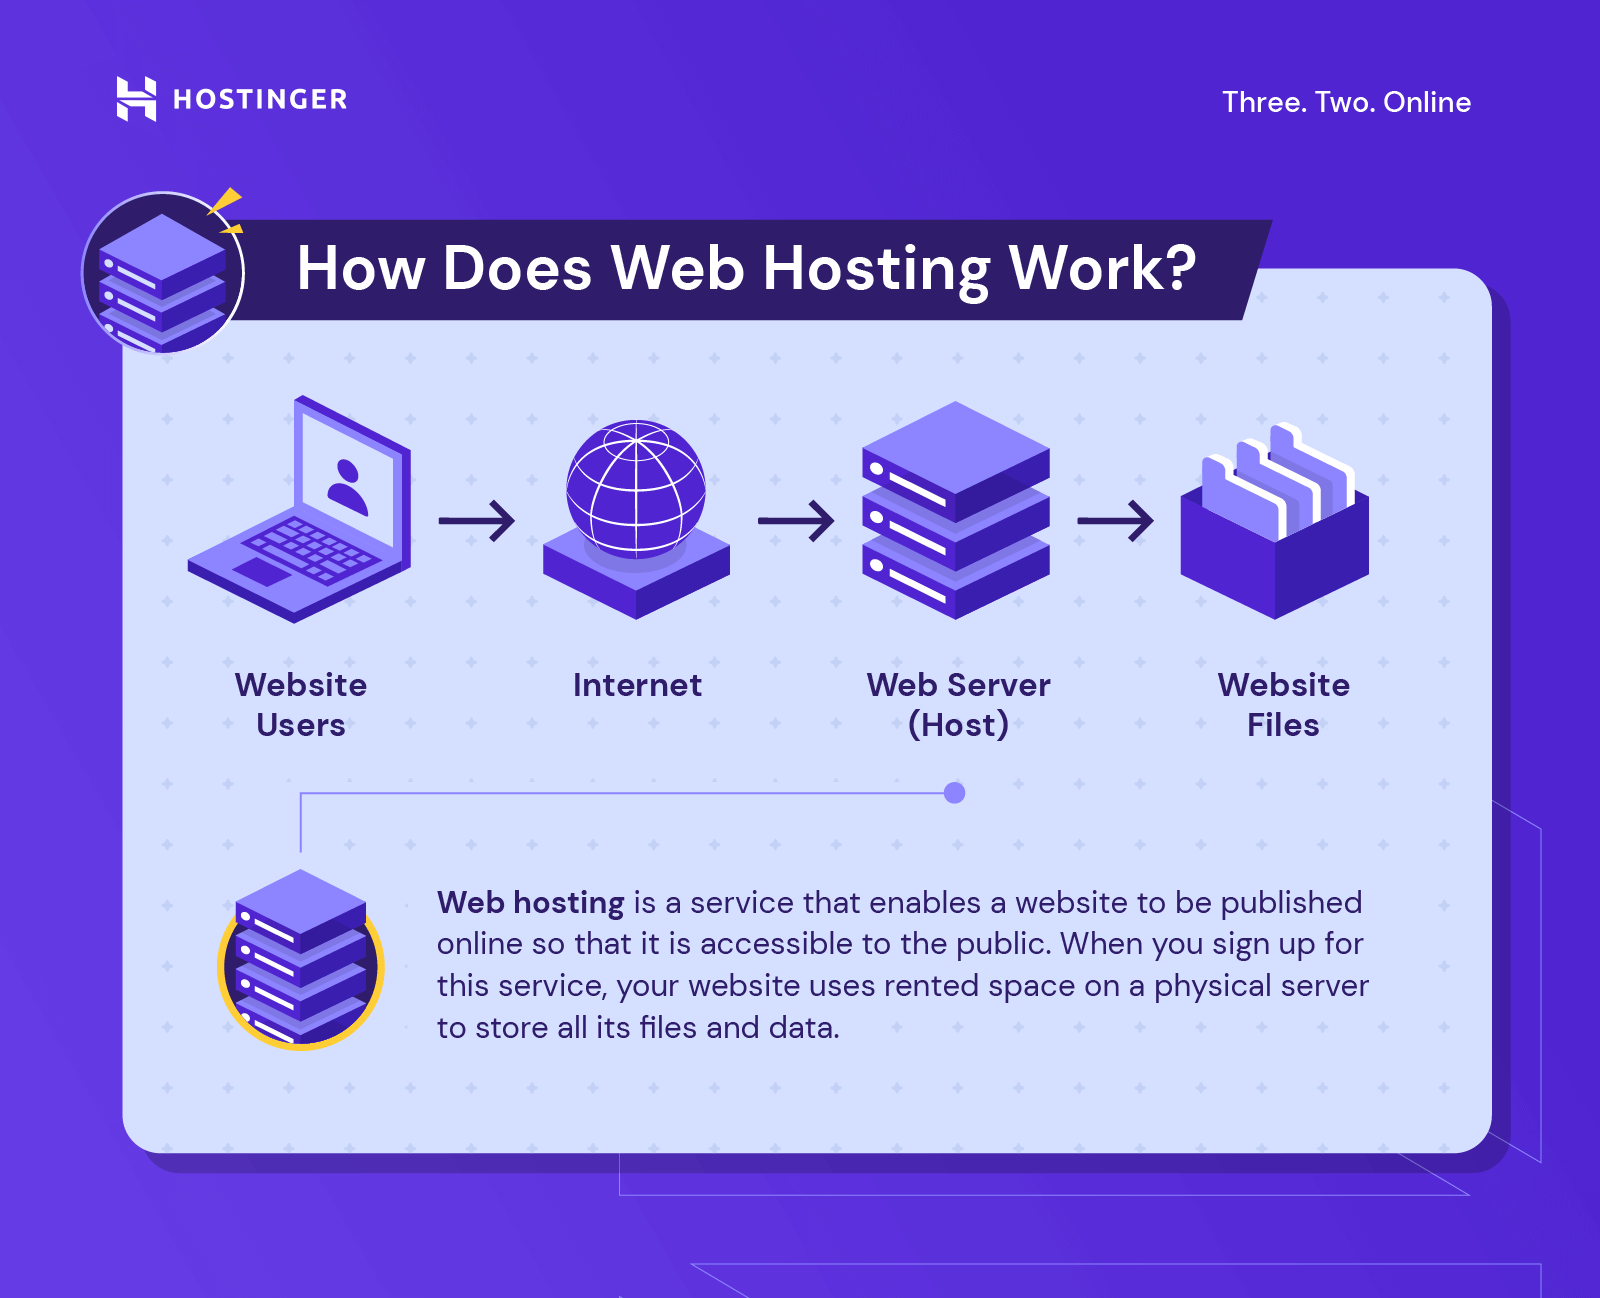 How to Host A Website: 4 Simple Steps and Why You Need Web Hosting